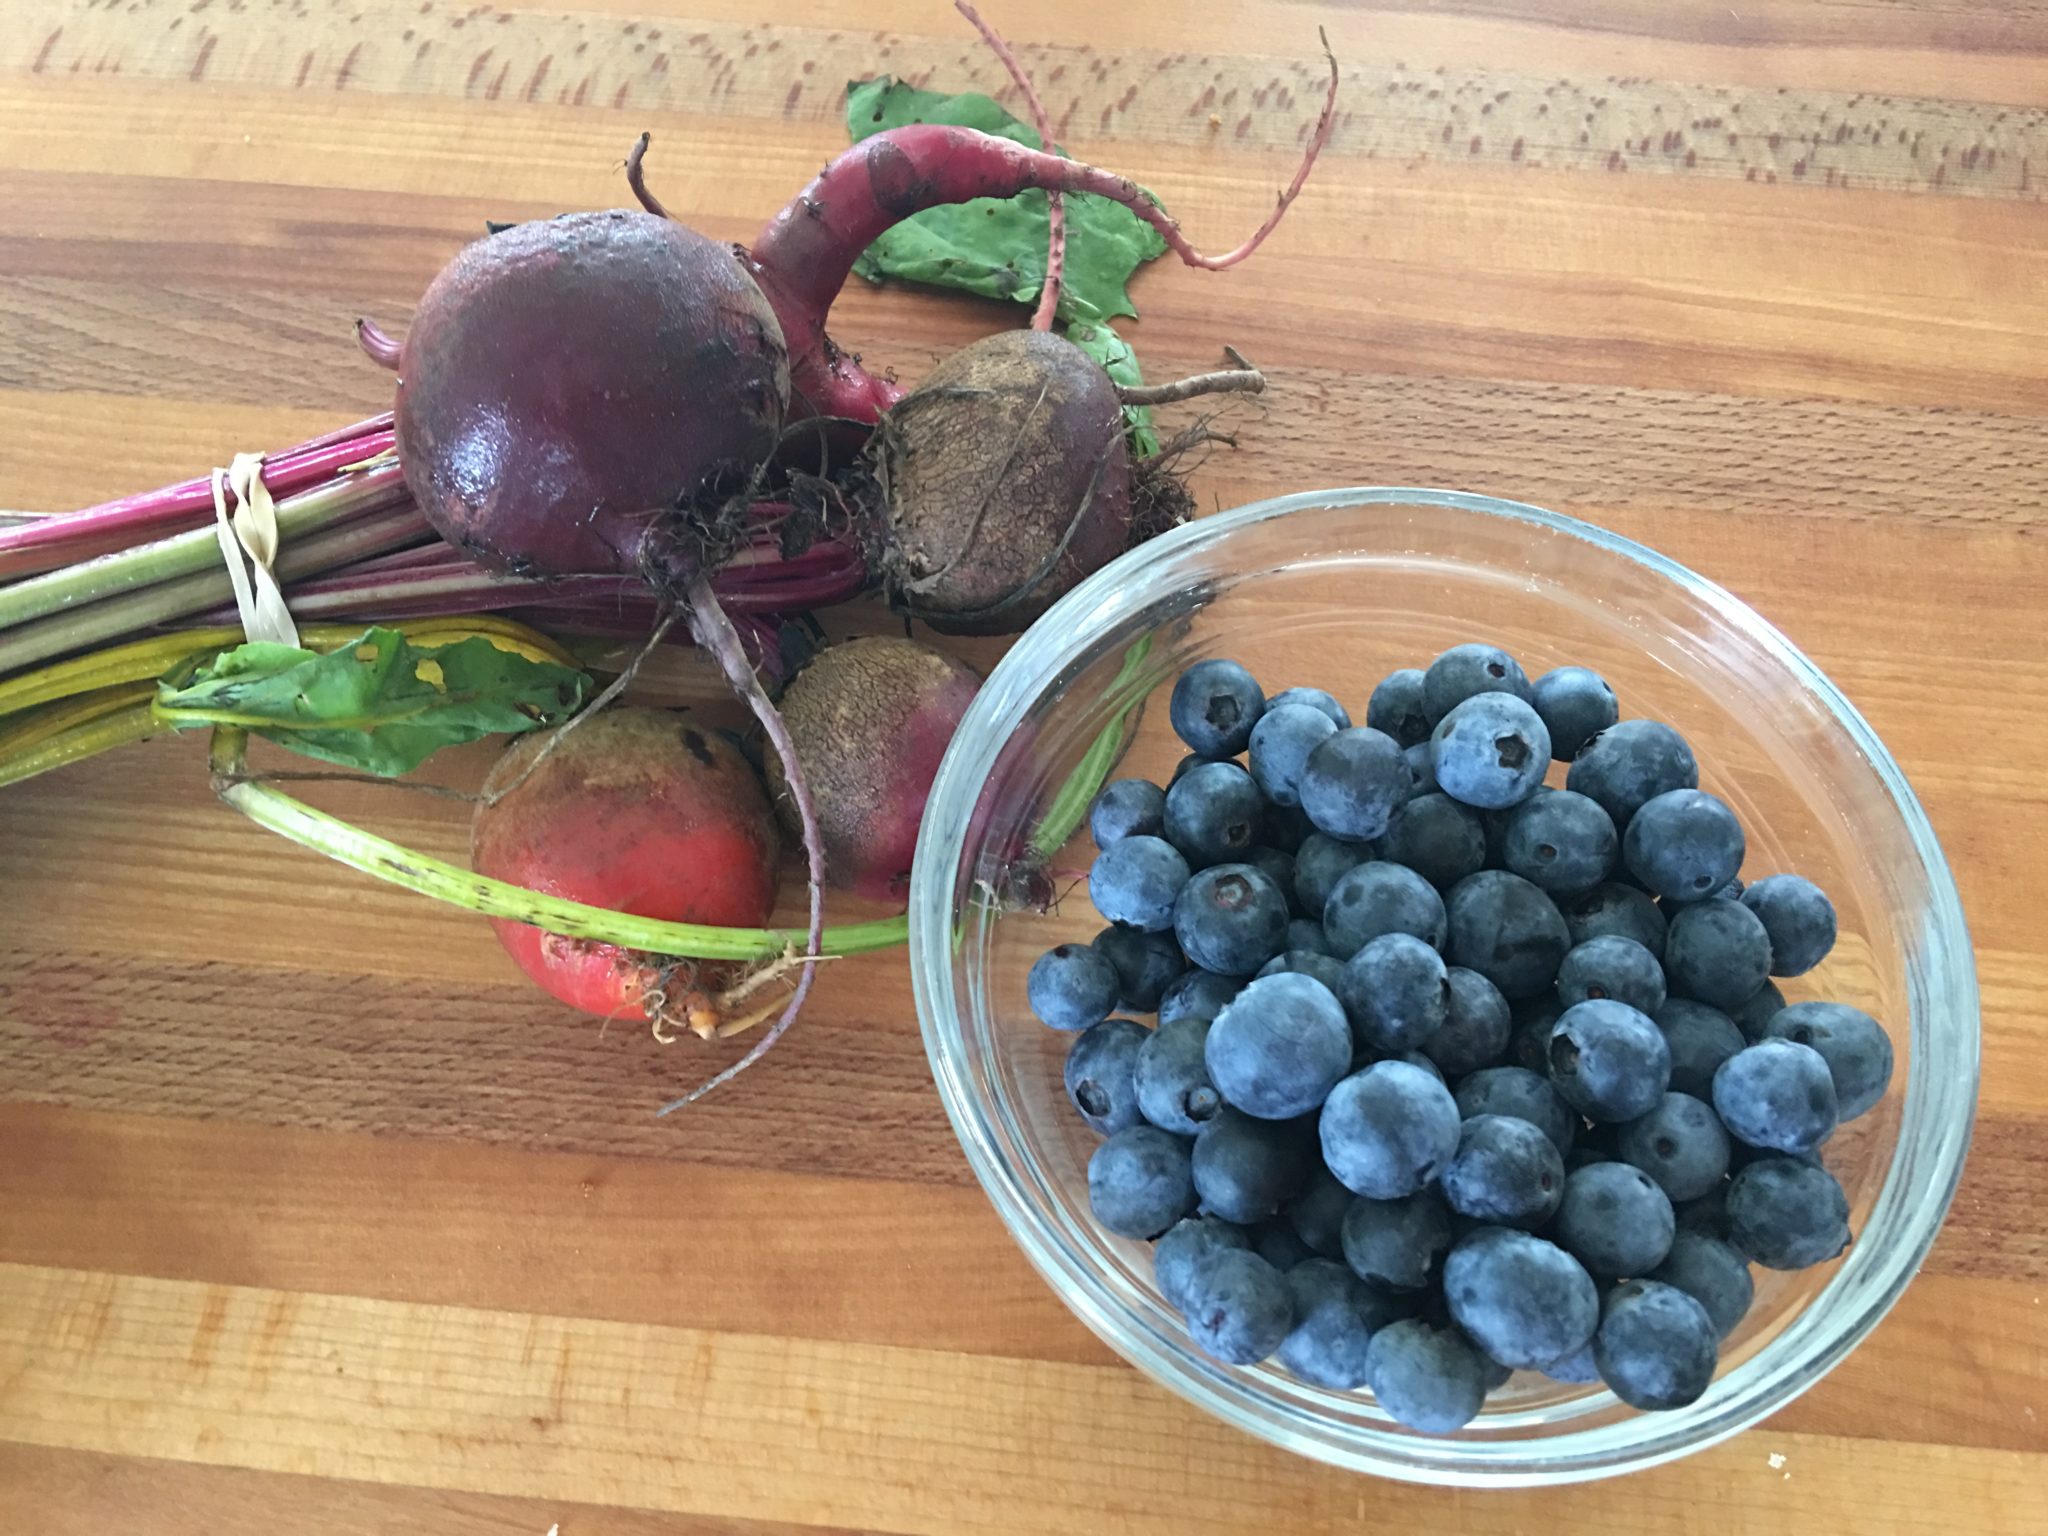 Blueberries and beets